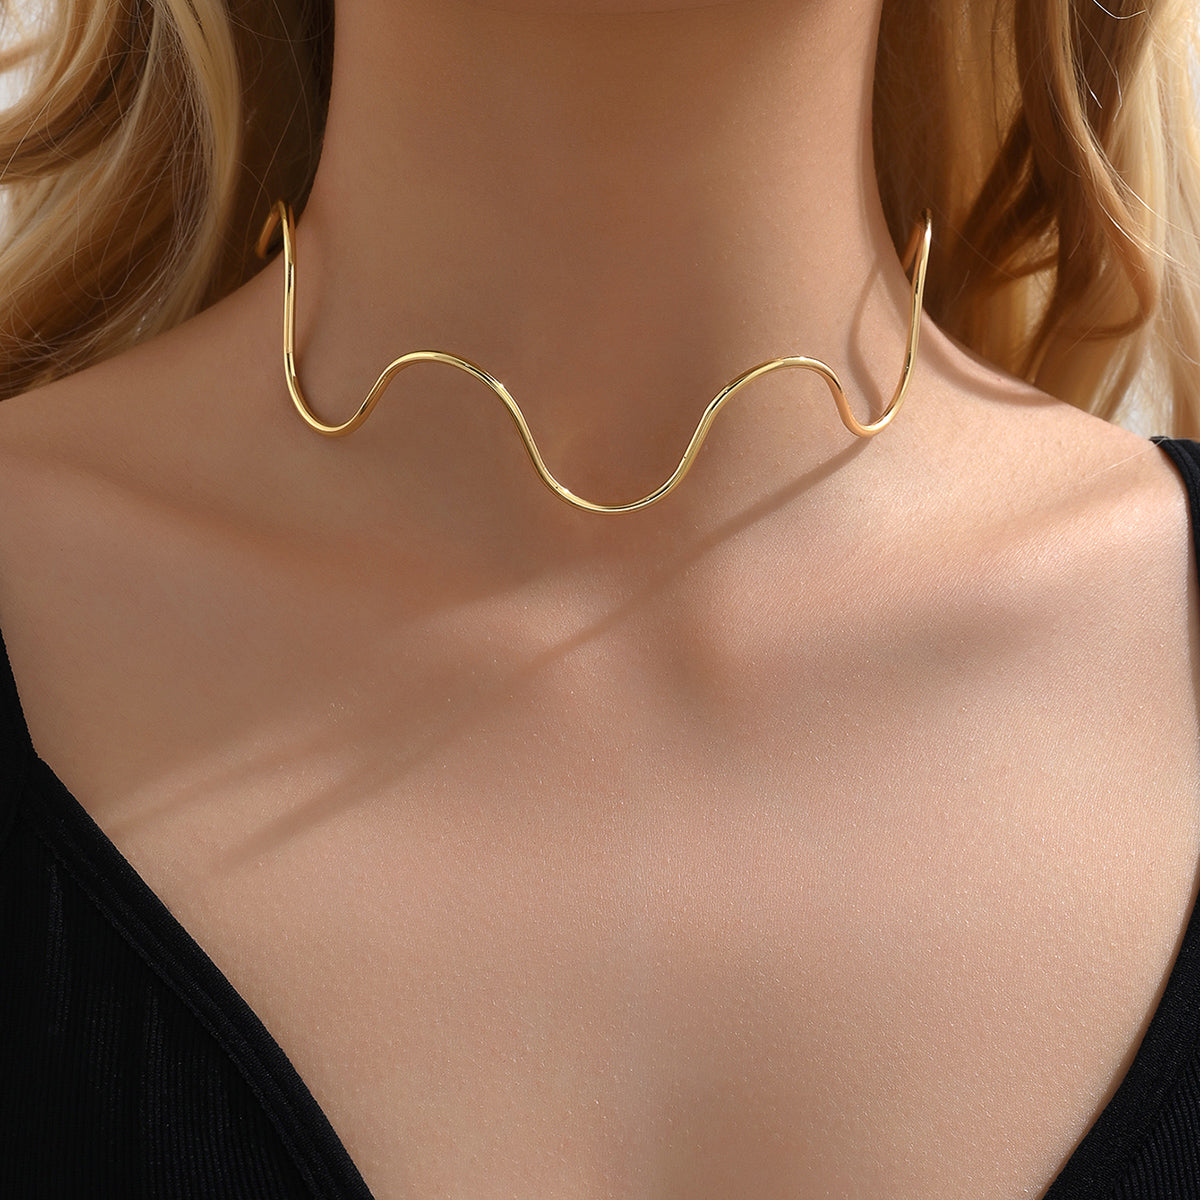 Casual iron choker in waves style